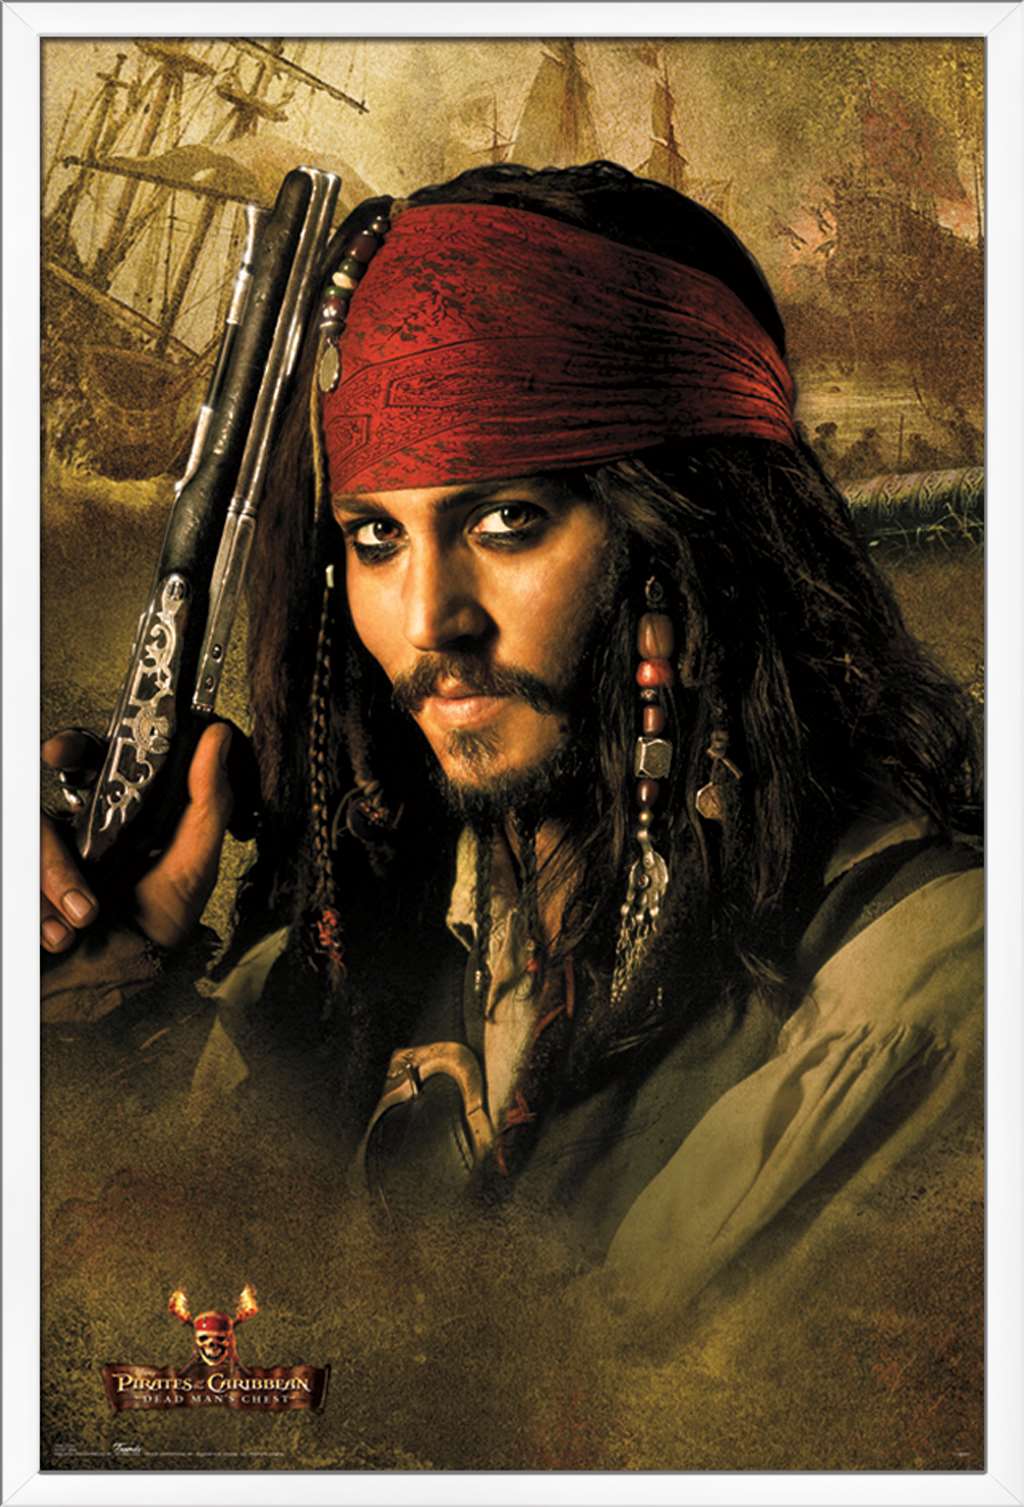 Disney Pirates of the Caribbean: Dead Man's Chest - Johnny Depp Wall Poster, 22.375" x 34", Framed - image 1 of 2